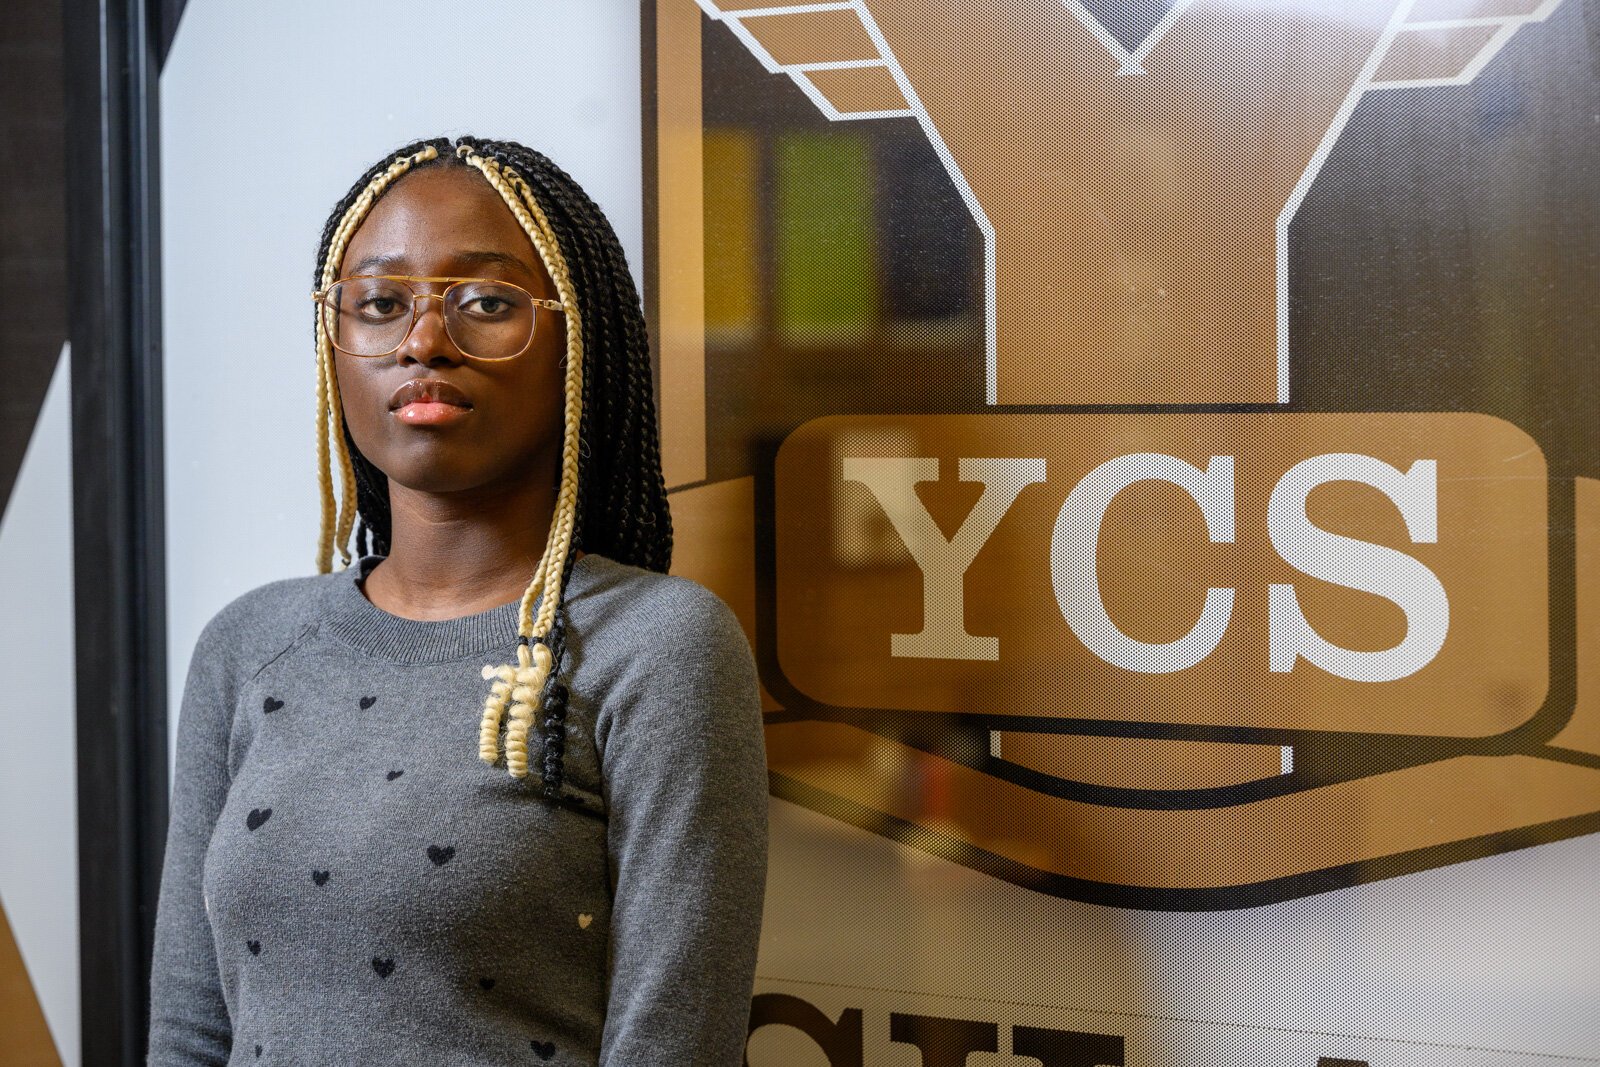 Ypsilanti Community High School senior Jackie Sakina struggles with stress and says it's important for students to be aware of the mental health services available to them.